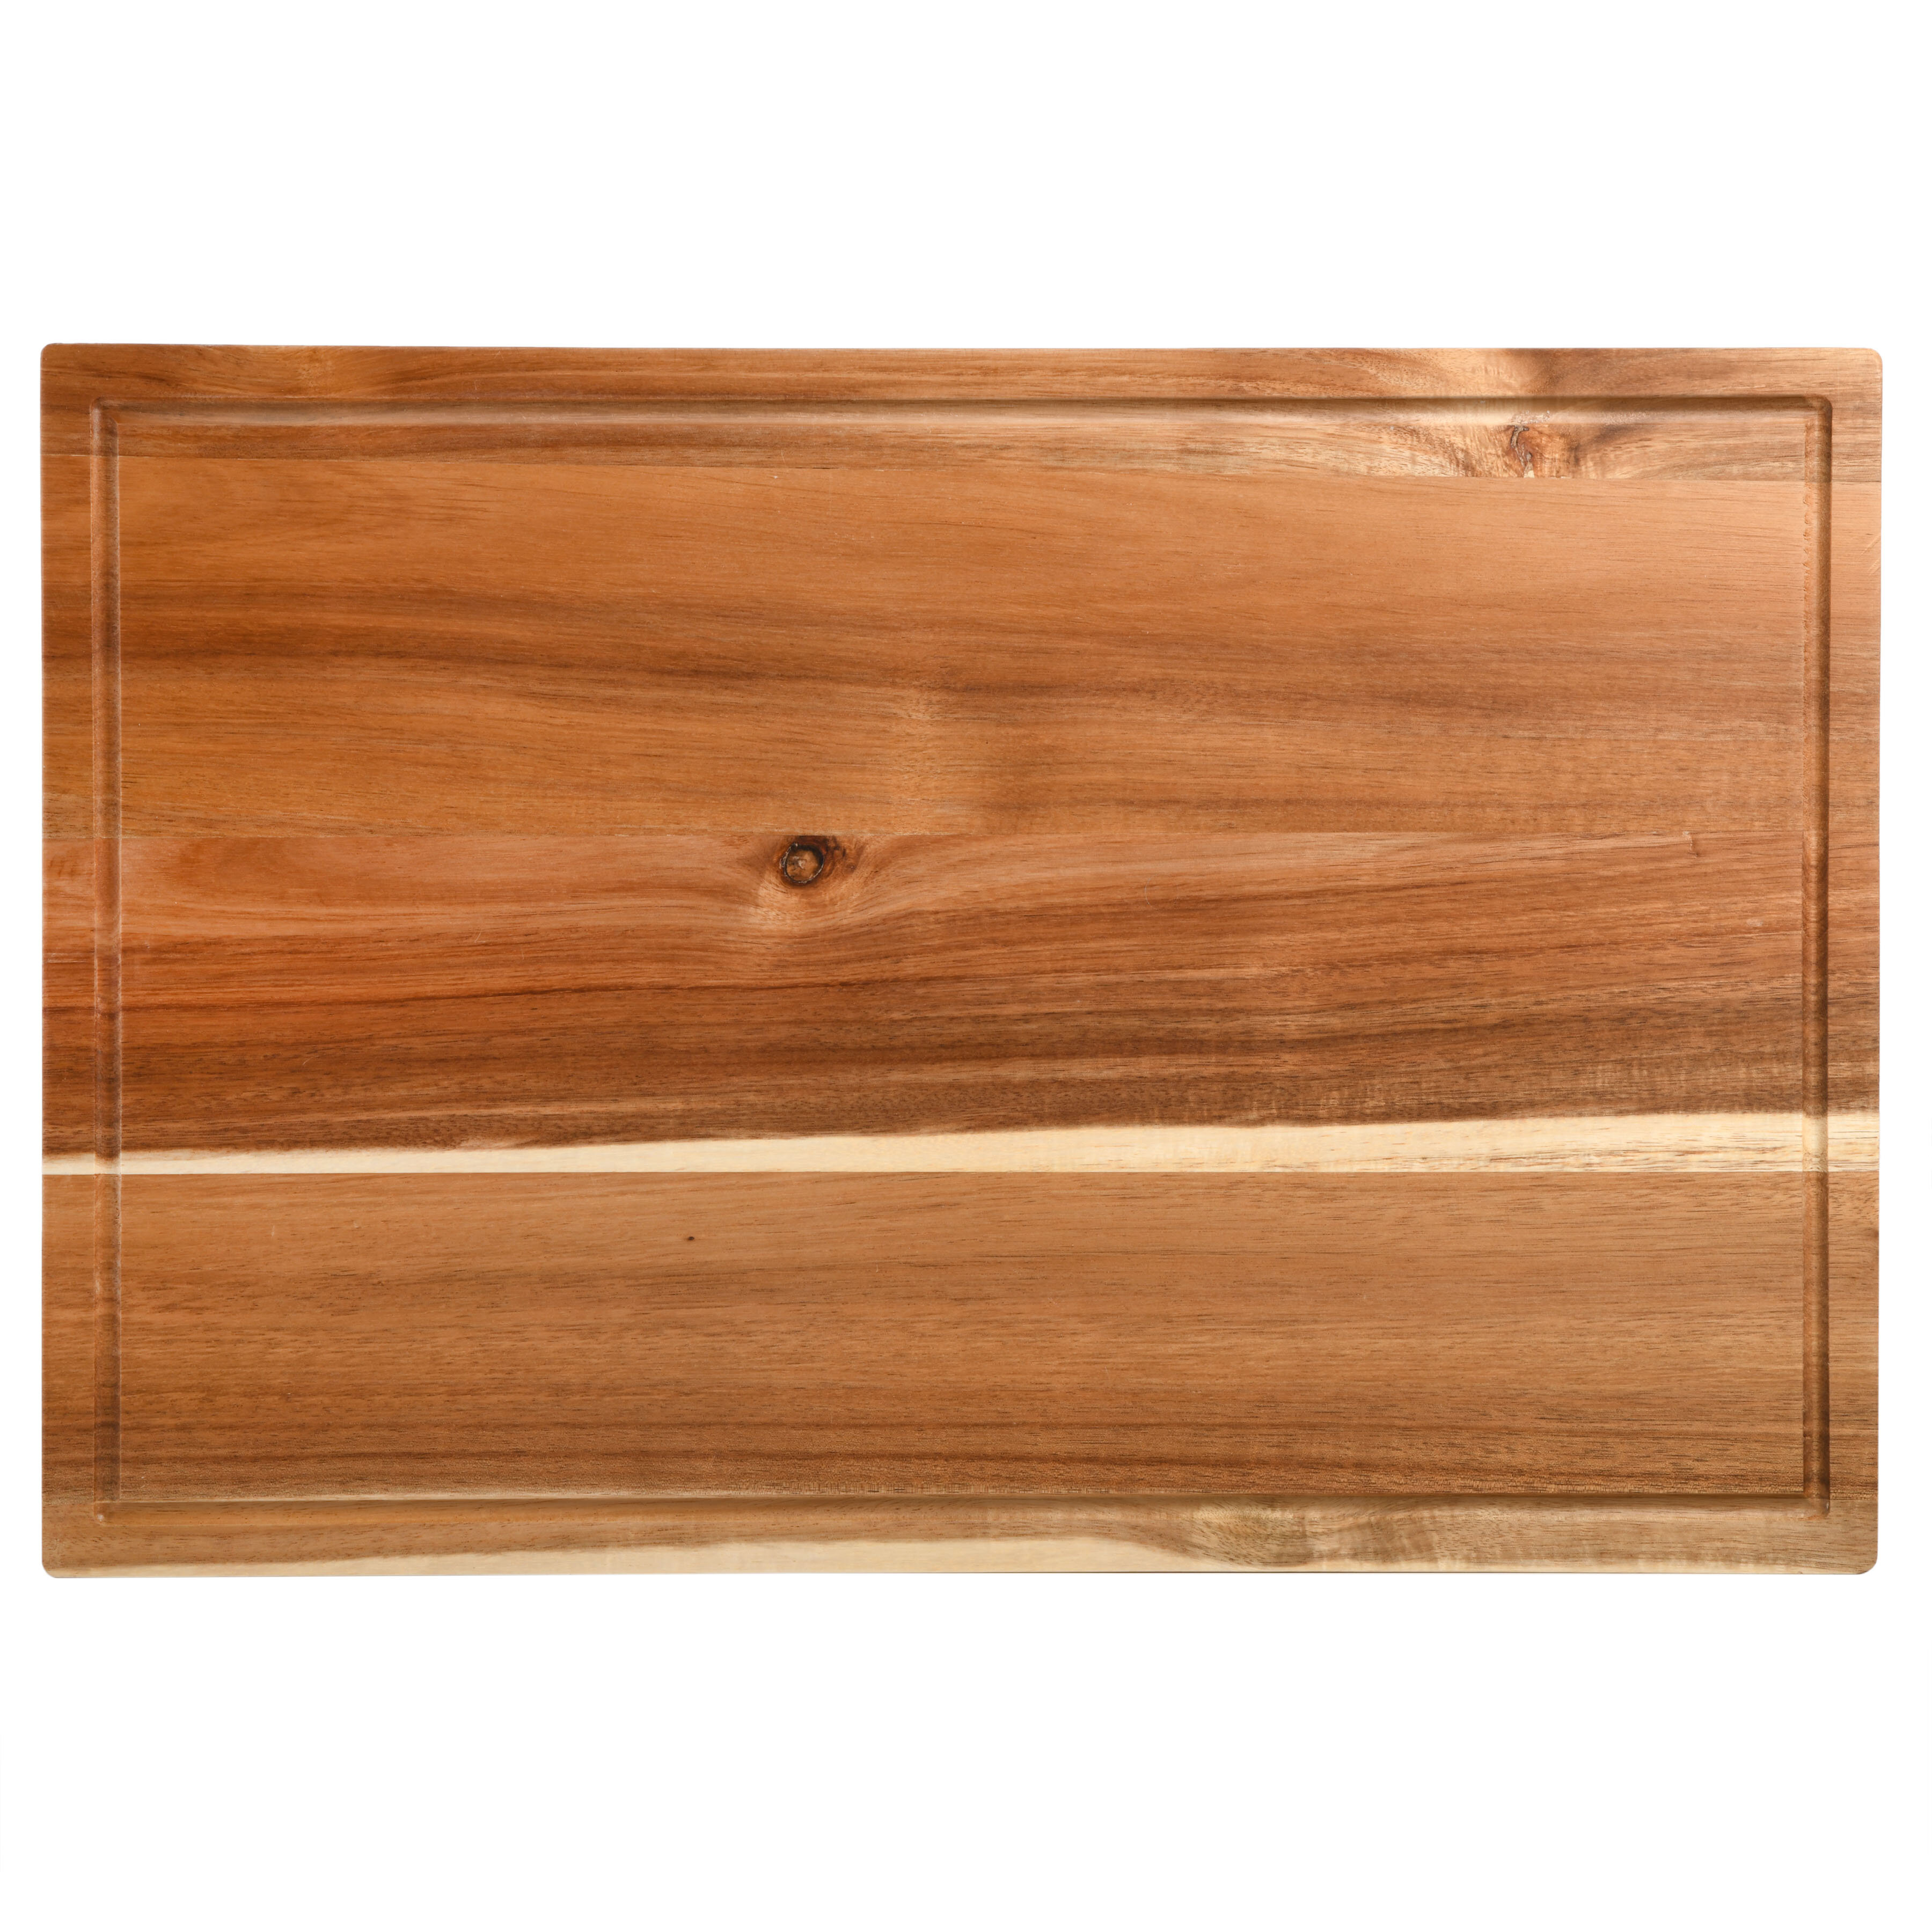 Extra Large XXXL Bamboo Cutting Board 24 x16 Inch, Largest Wooden Butcher  Block for Turkey, Meat, Vegetables, BBQ, Over the Sink Chopping Board with